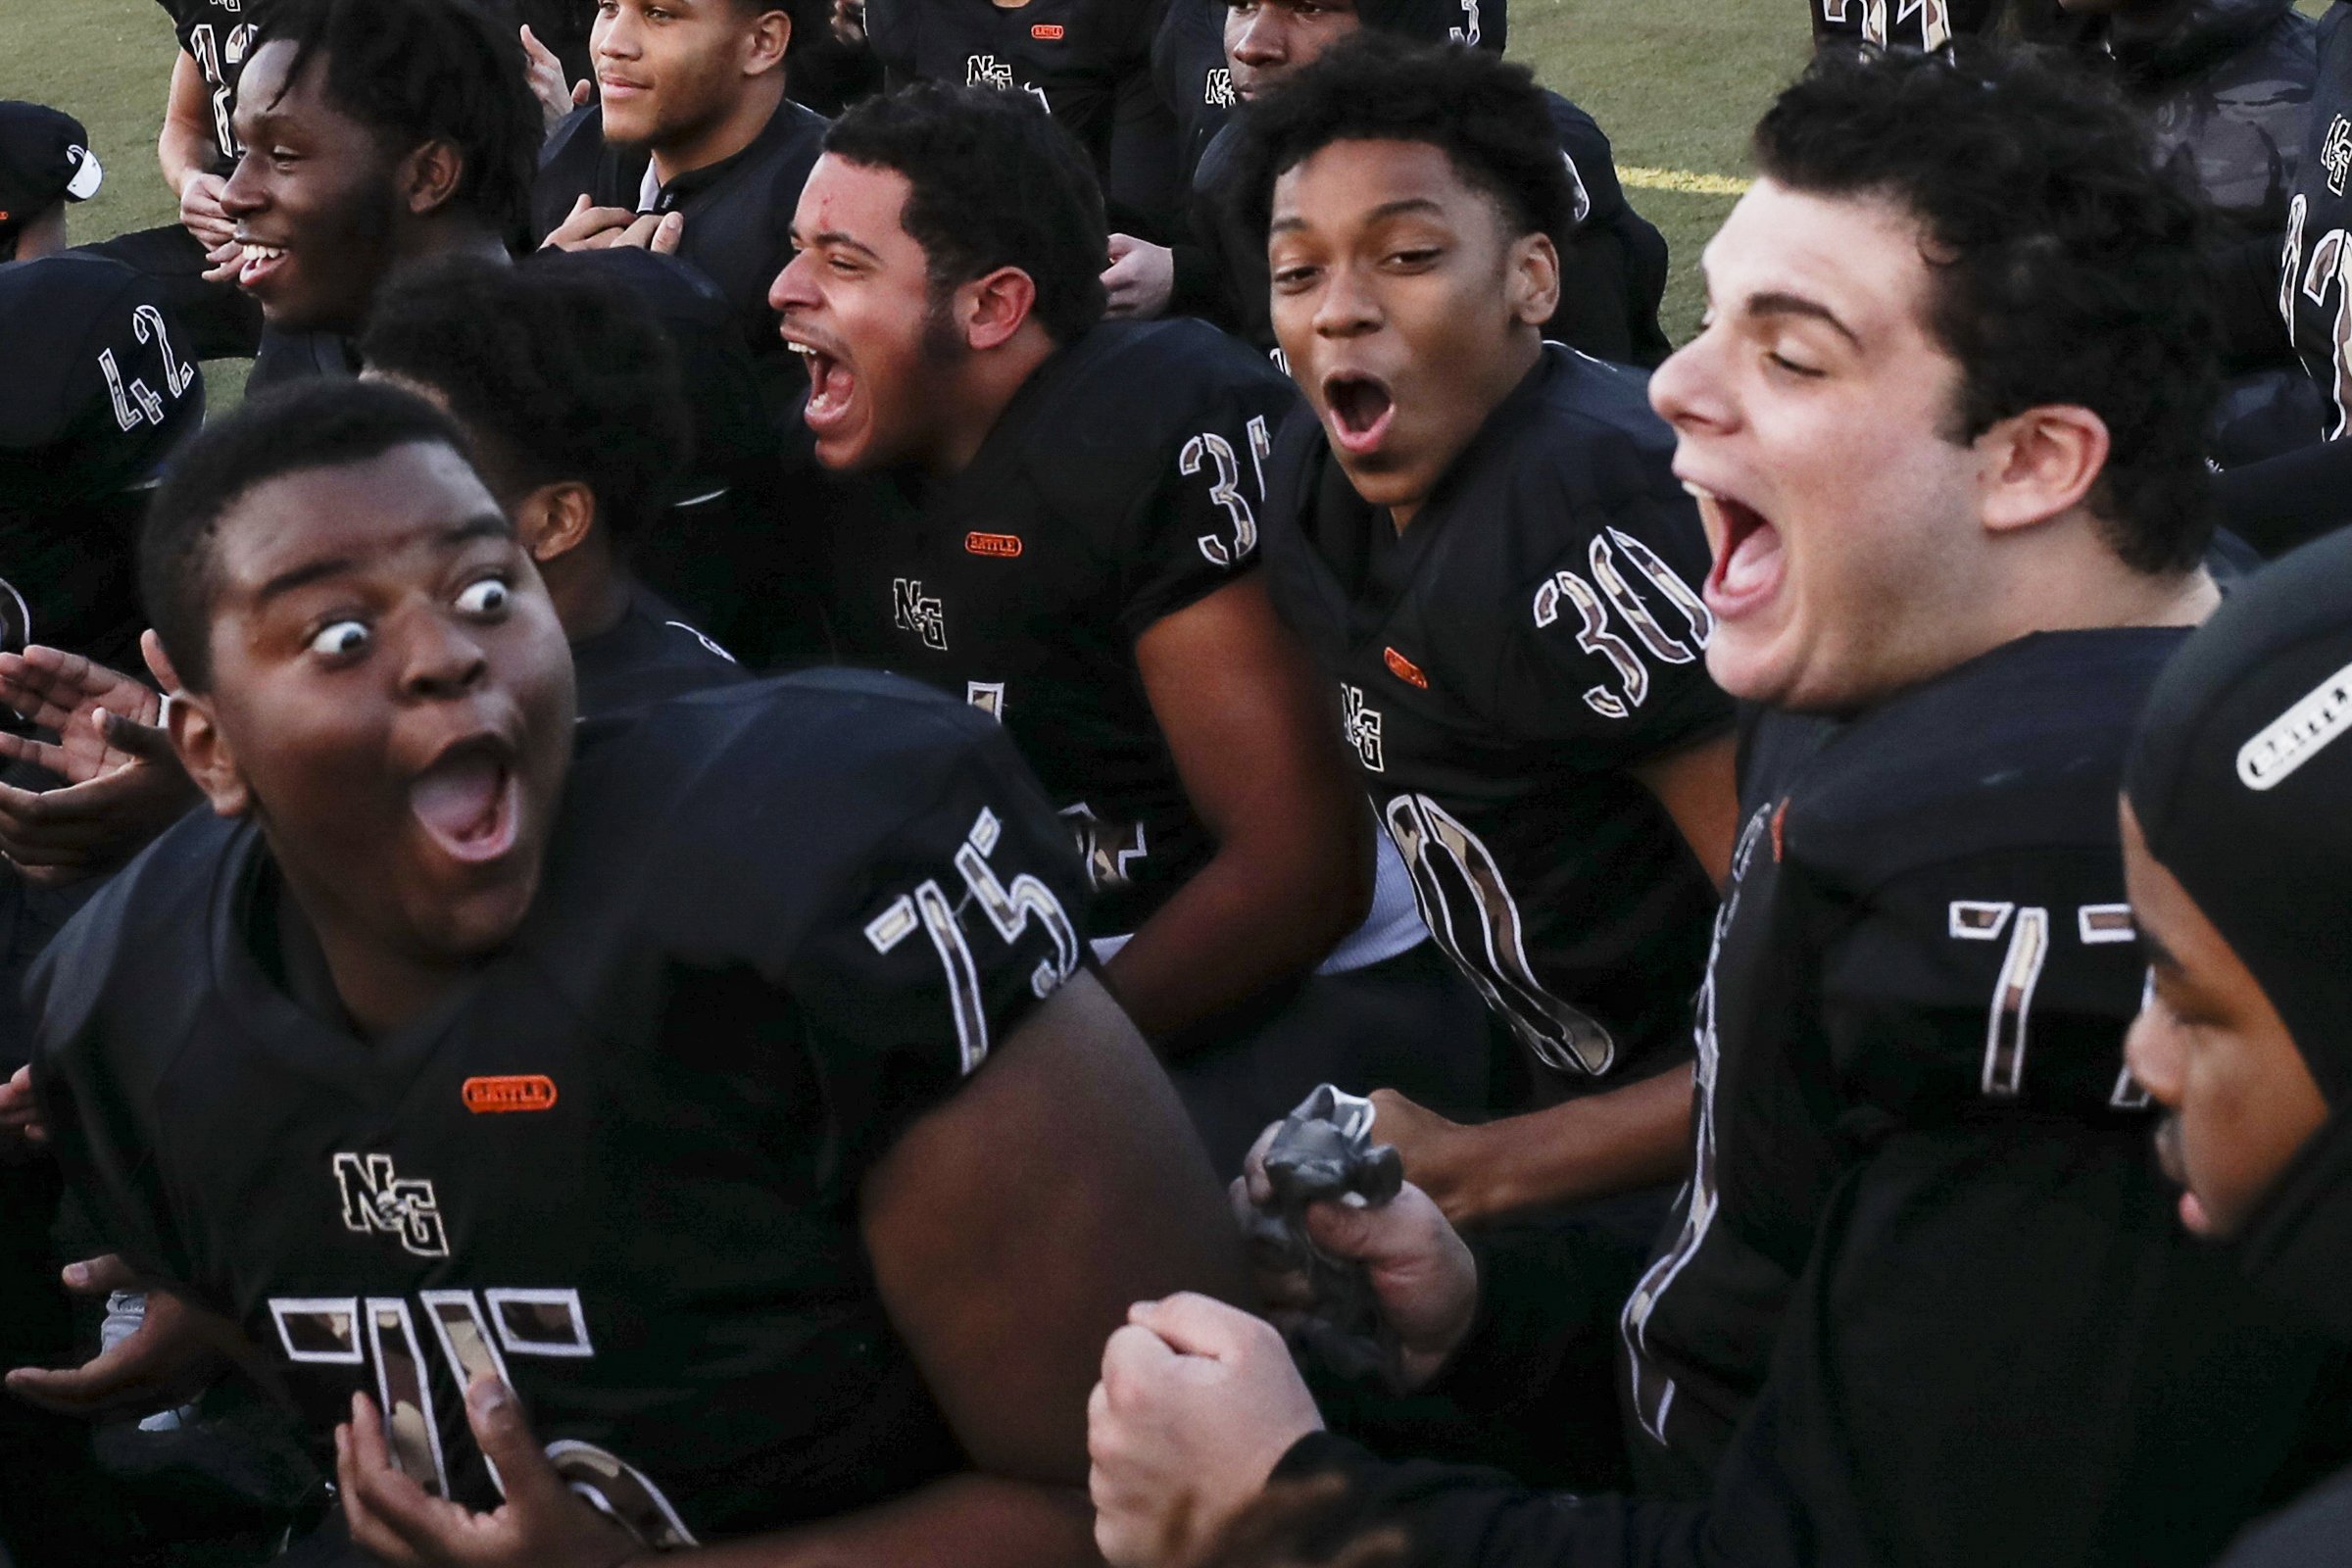  Neumann-Goretti players react after being told by their coach that Monday’s practice will be at the Eagles’ facility following their PIAA semifinal win over Wyomissing in Philadelphia on Dec. 3, 2022.  The win earned them a trip to the state finals.